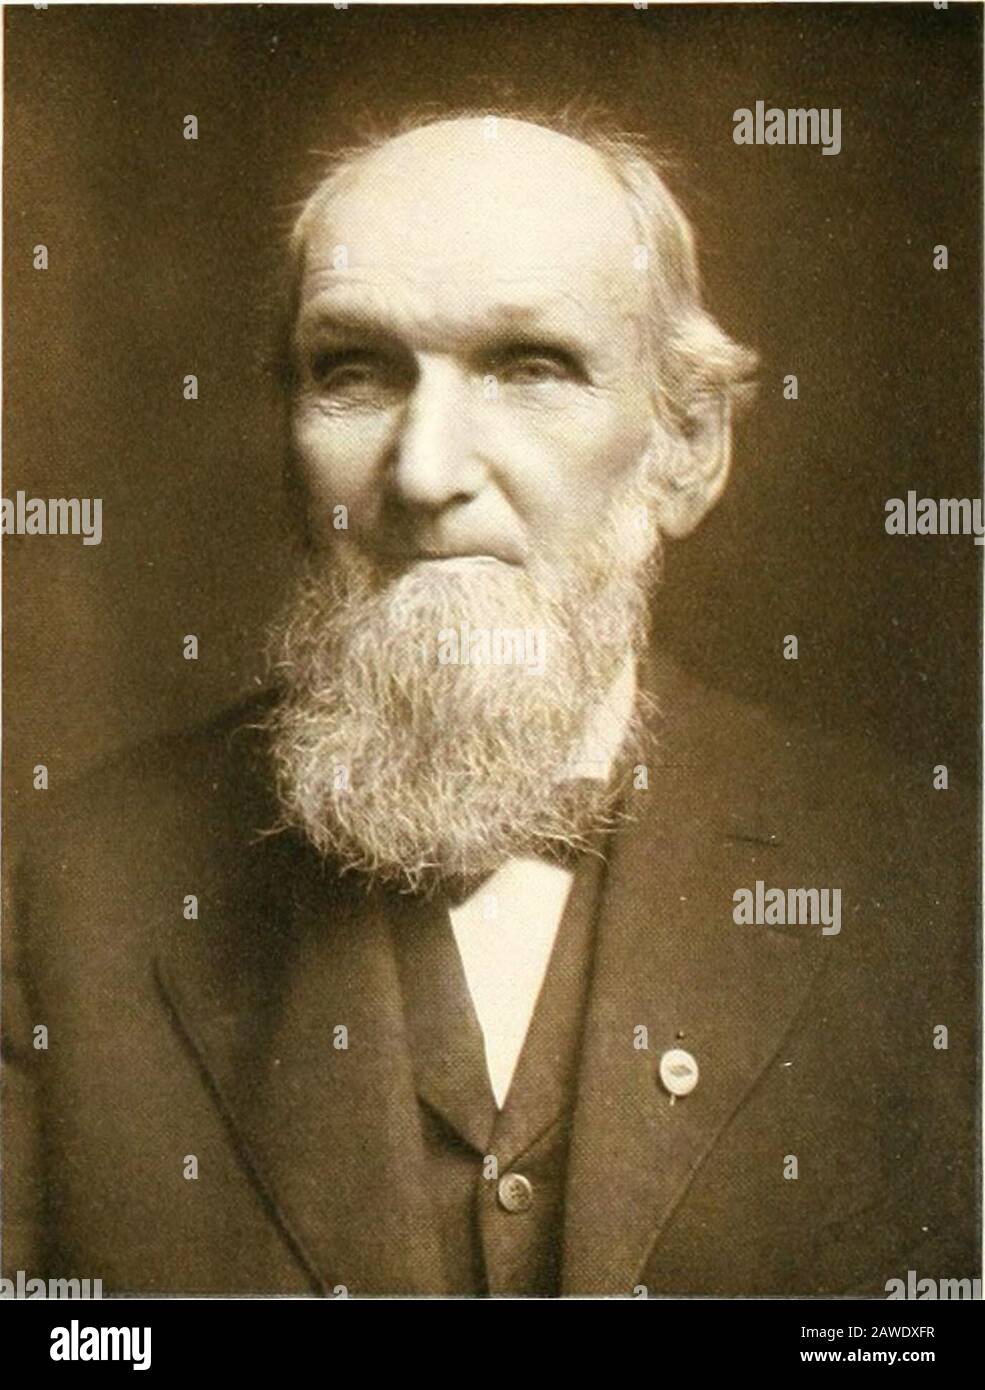 Pioneers of Polk County, Iowa, and reminiscences of early days . ce could be obtained, until, in 1856, EdwinHall donated a lot on Seventh Street, where now is the annex tothe Younlcer store, and a small chapel was erected. Doctor Peet,the first Rector, was a missionary—a noble, worthy man—who,with Father Bird and Elder Nash, formed a triumvirate of good-ness and virtue which laid the foundation of that public sentimentwhich has made this a widely notable community of schools andchurches. Politically, Yoimg was a radical Whig, but not a politician. Theonly public office he held was given him wh Stock Photo